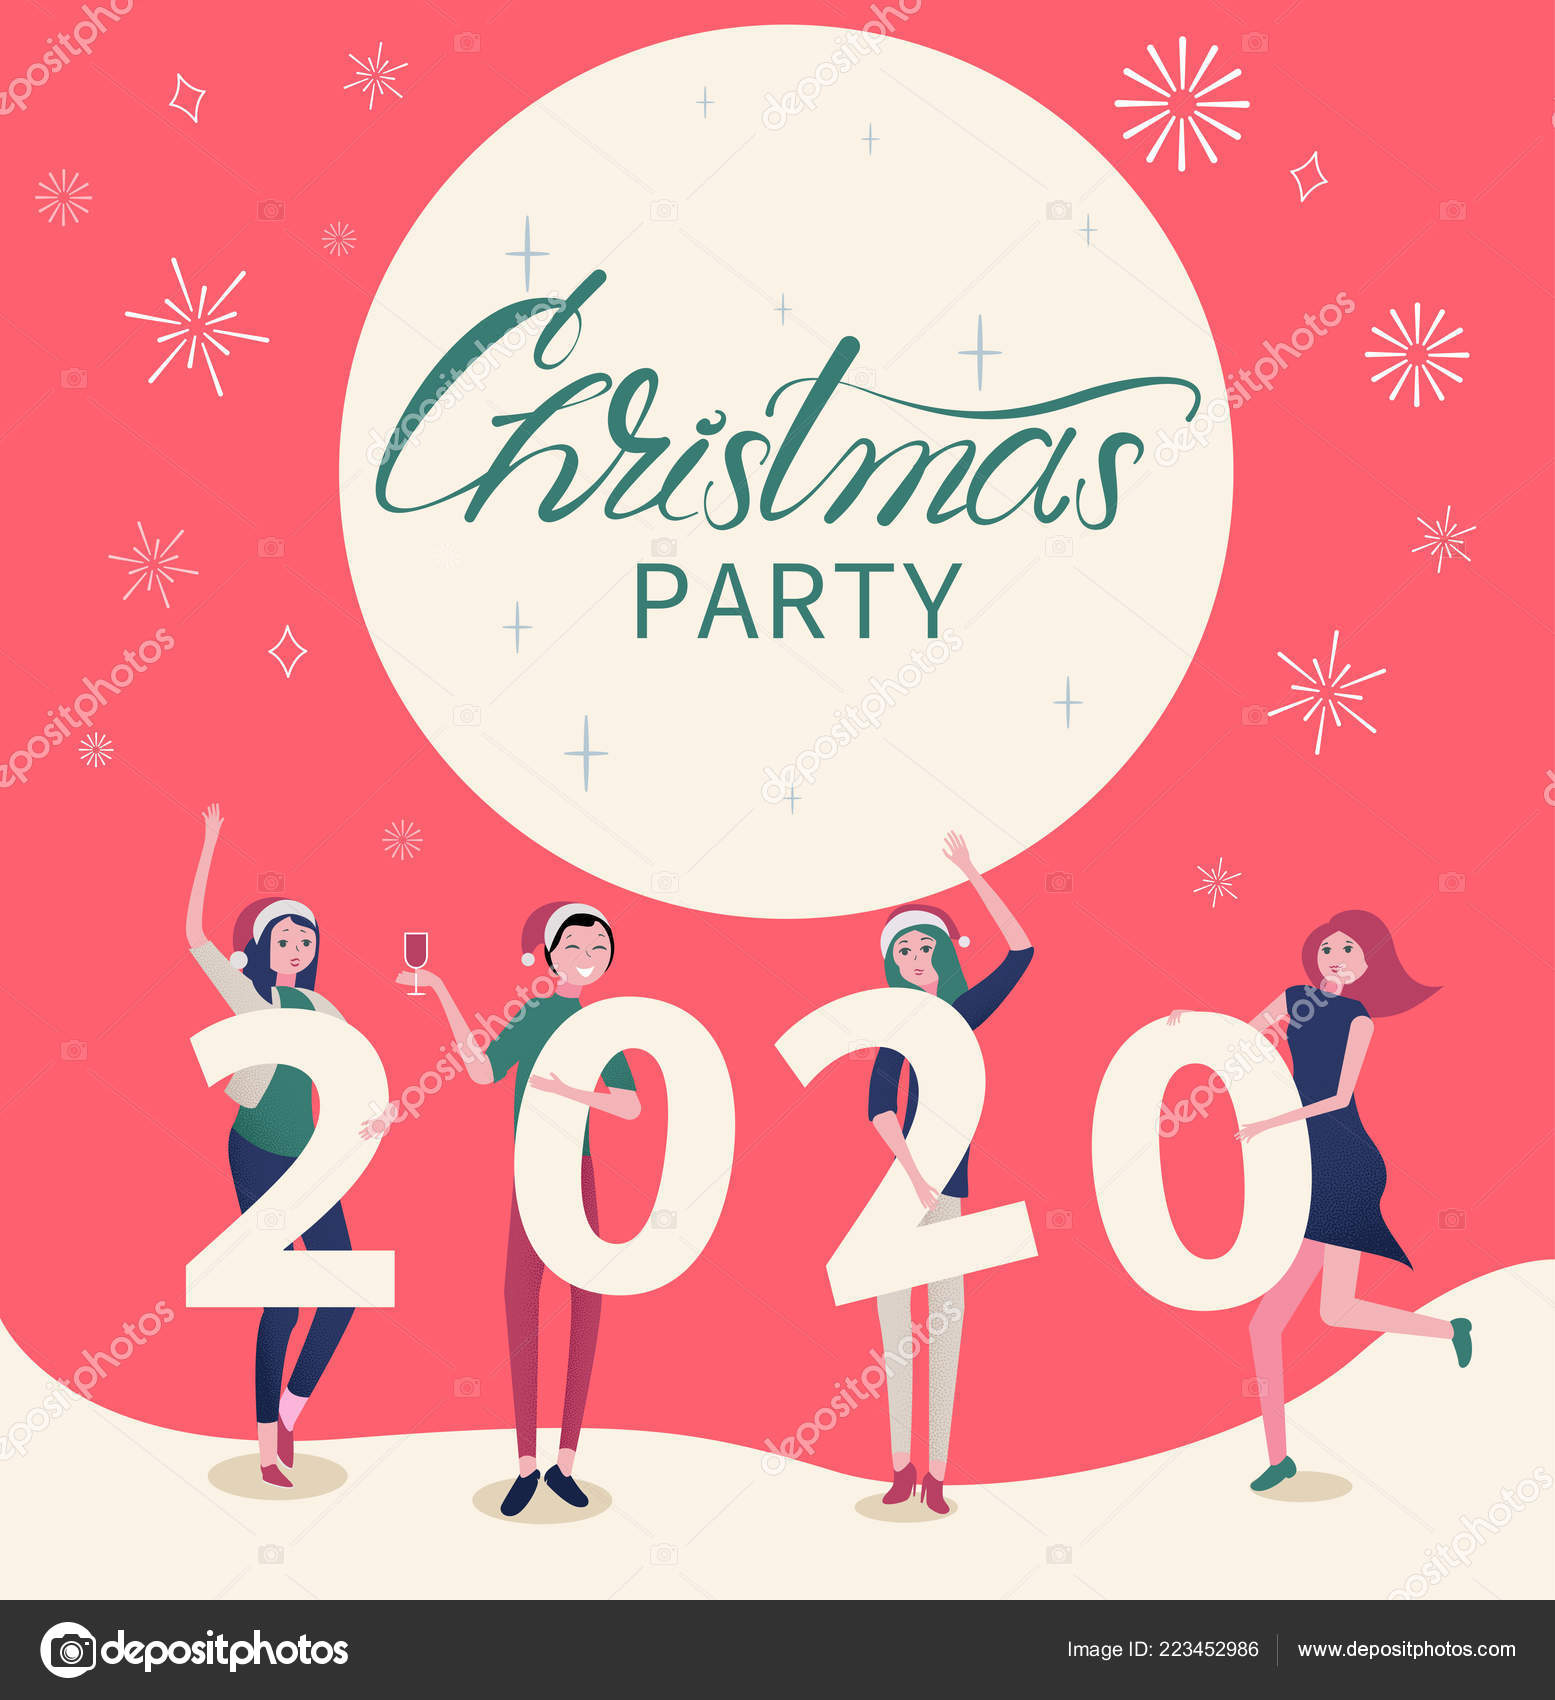 christmas party 2020 Christmas Party 2020 Poster With People And Figures Stock Vector C Svetlaboro 223452986 christmas party 2020